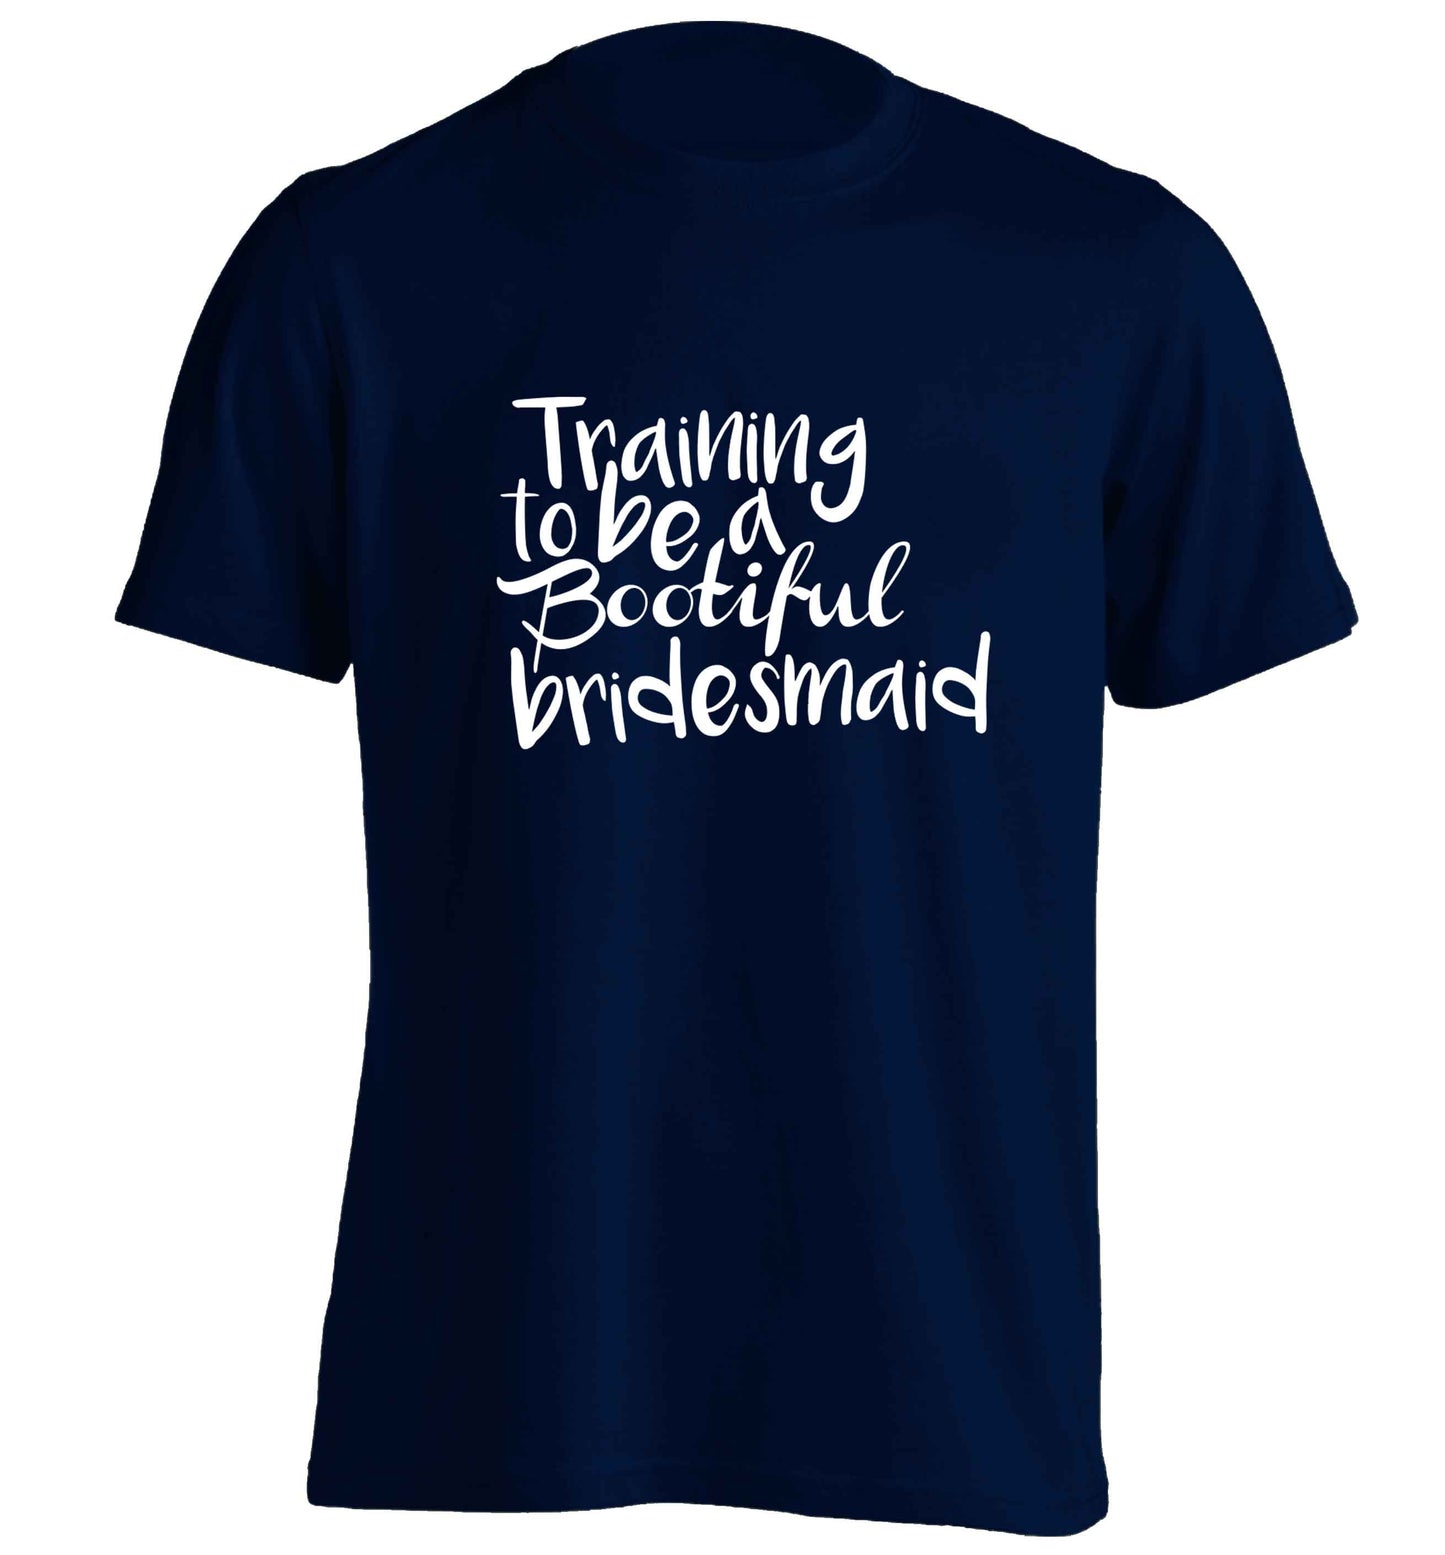 Get motivated and get fit for your big day! Our workout quotes and designs will get you ready to sweat! Perfect for any bride, groom or bridesmaid to be!  adults unisex navy Tshirt 2XL